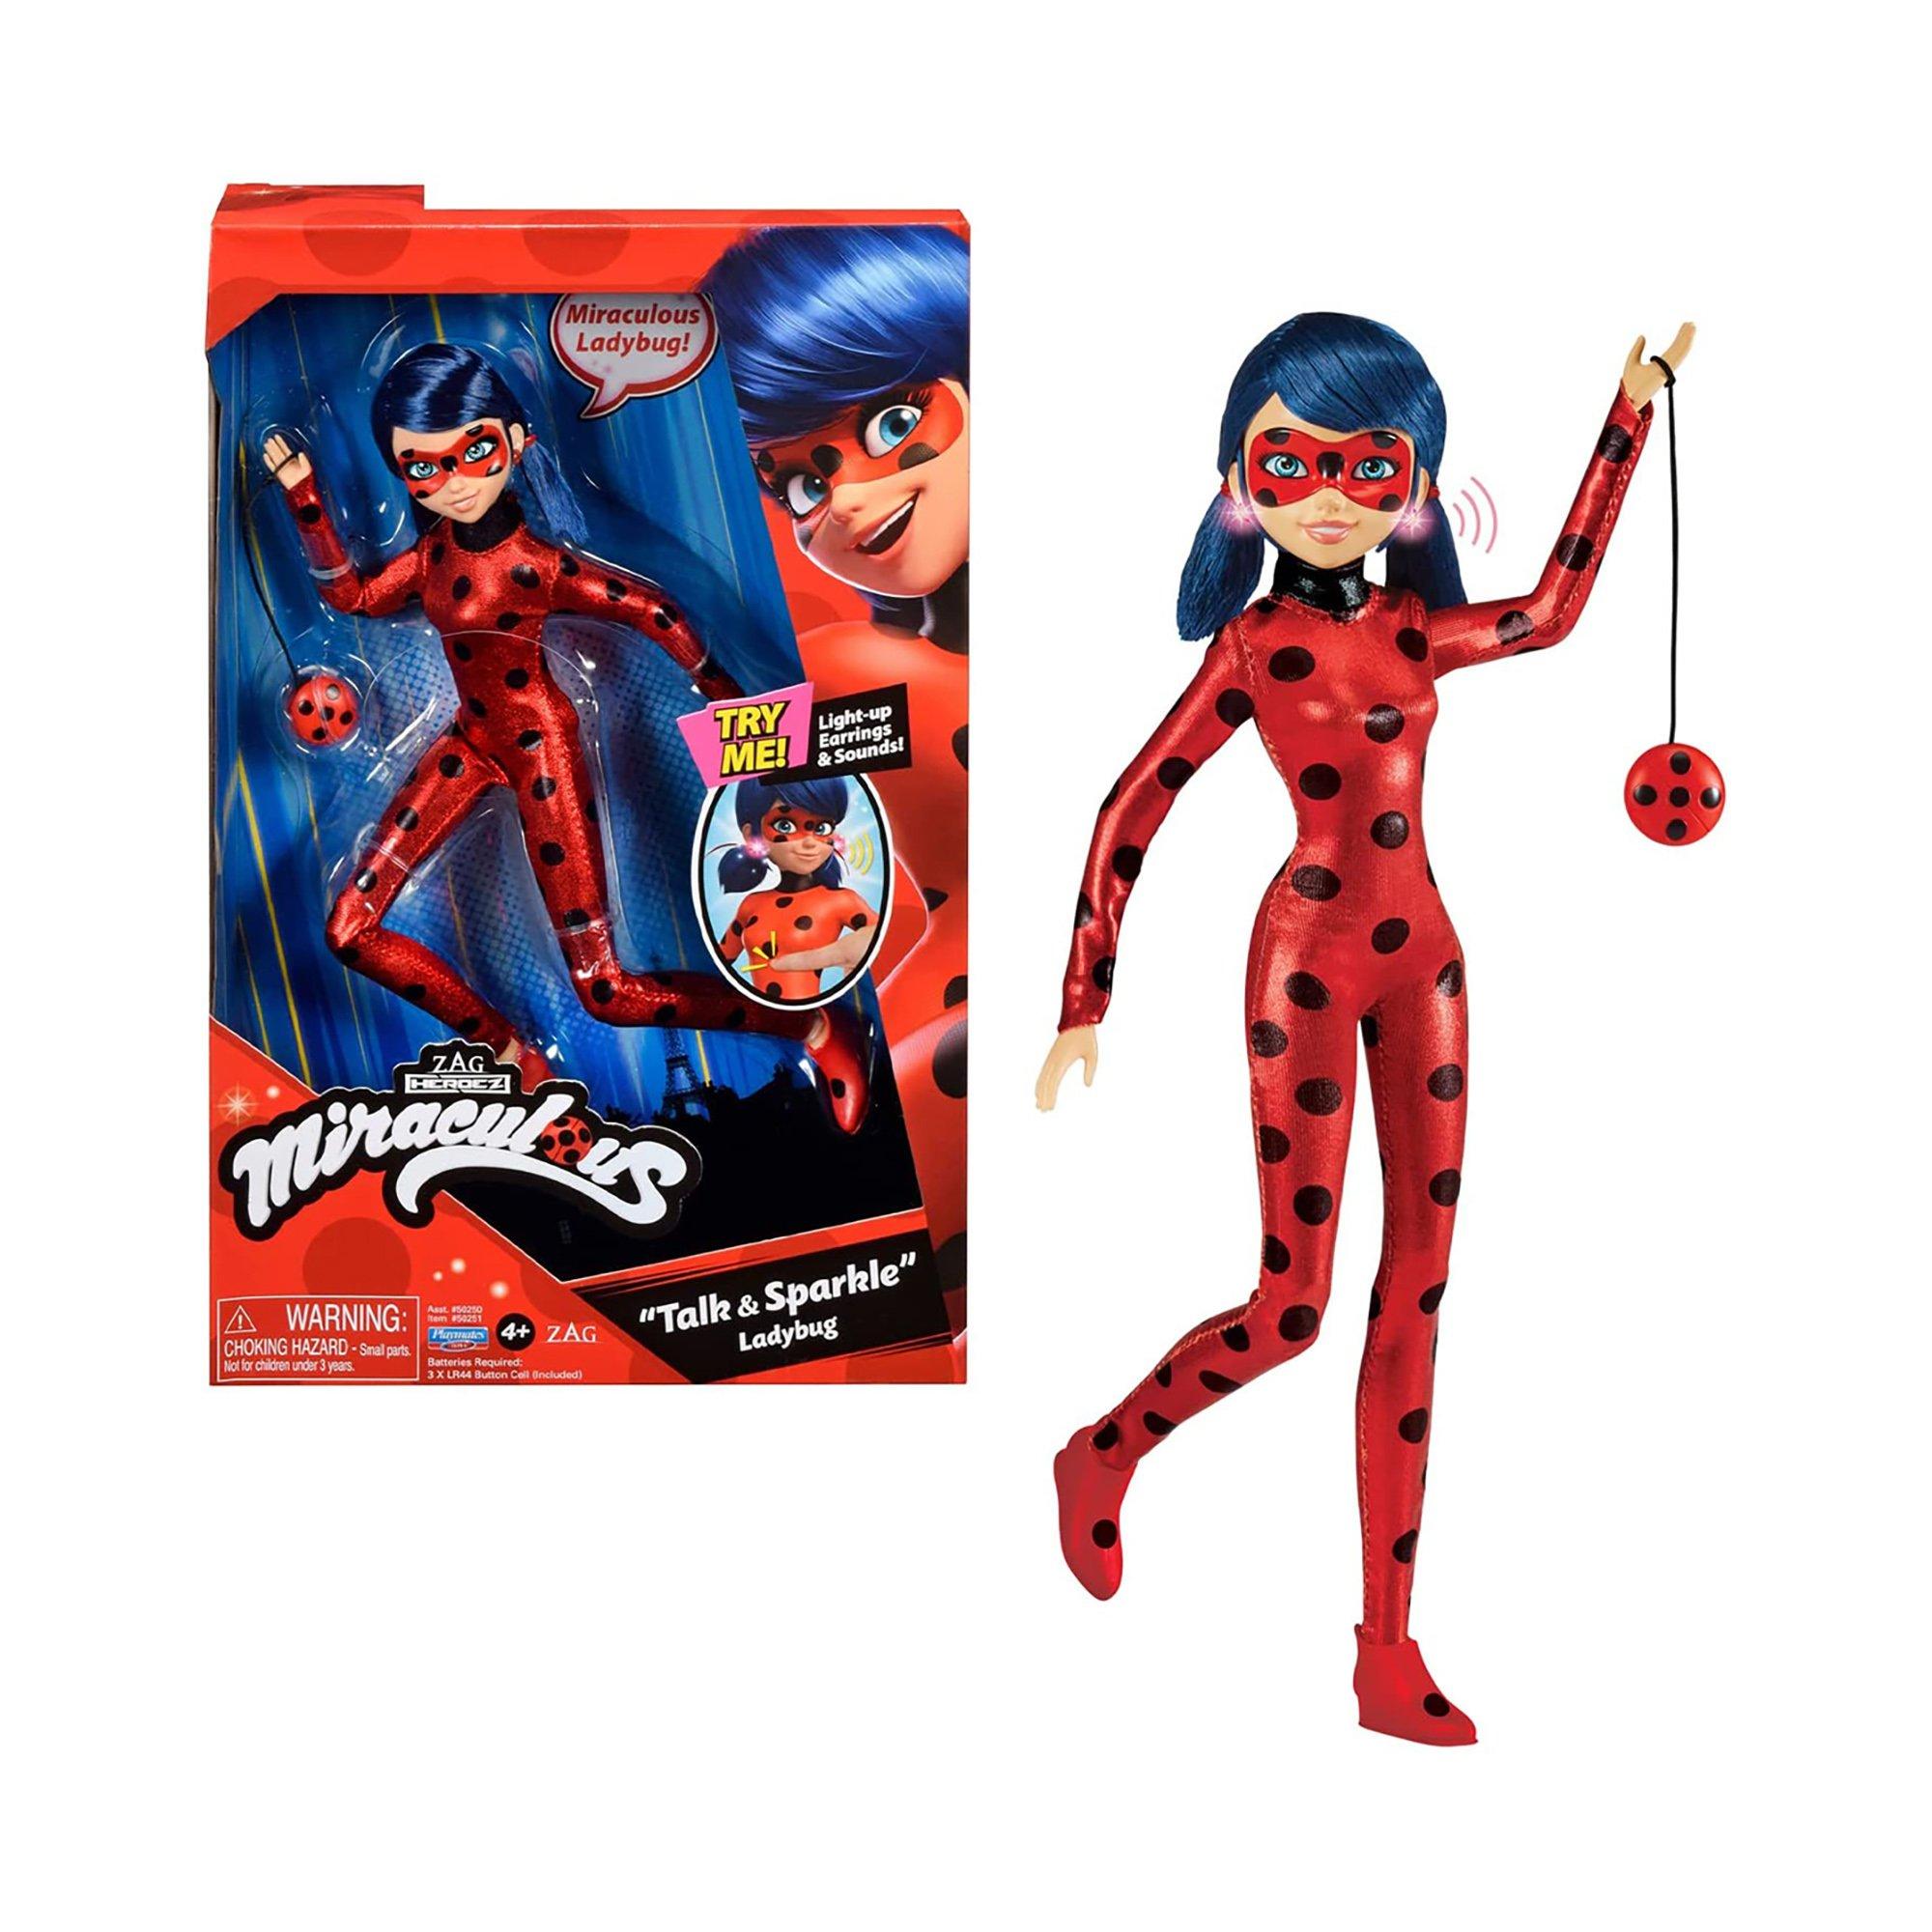 Image of Bandai Miraculous Funktionspuppe 26cm